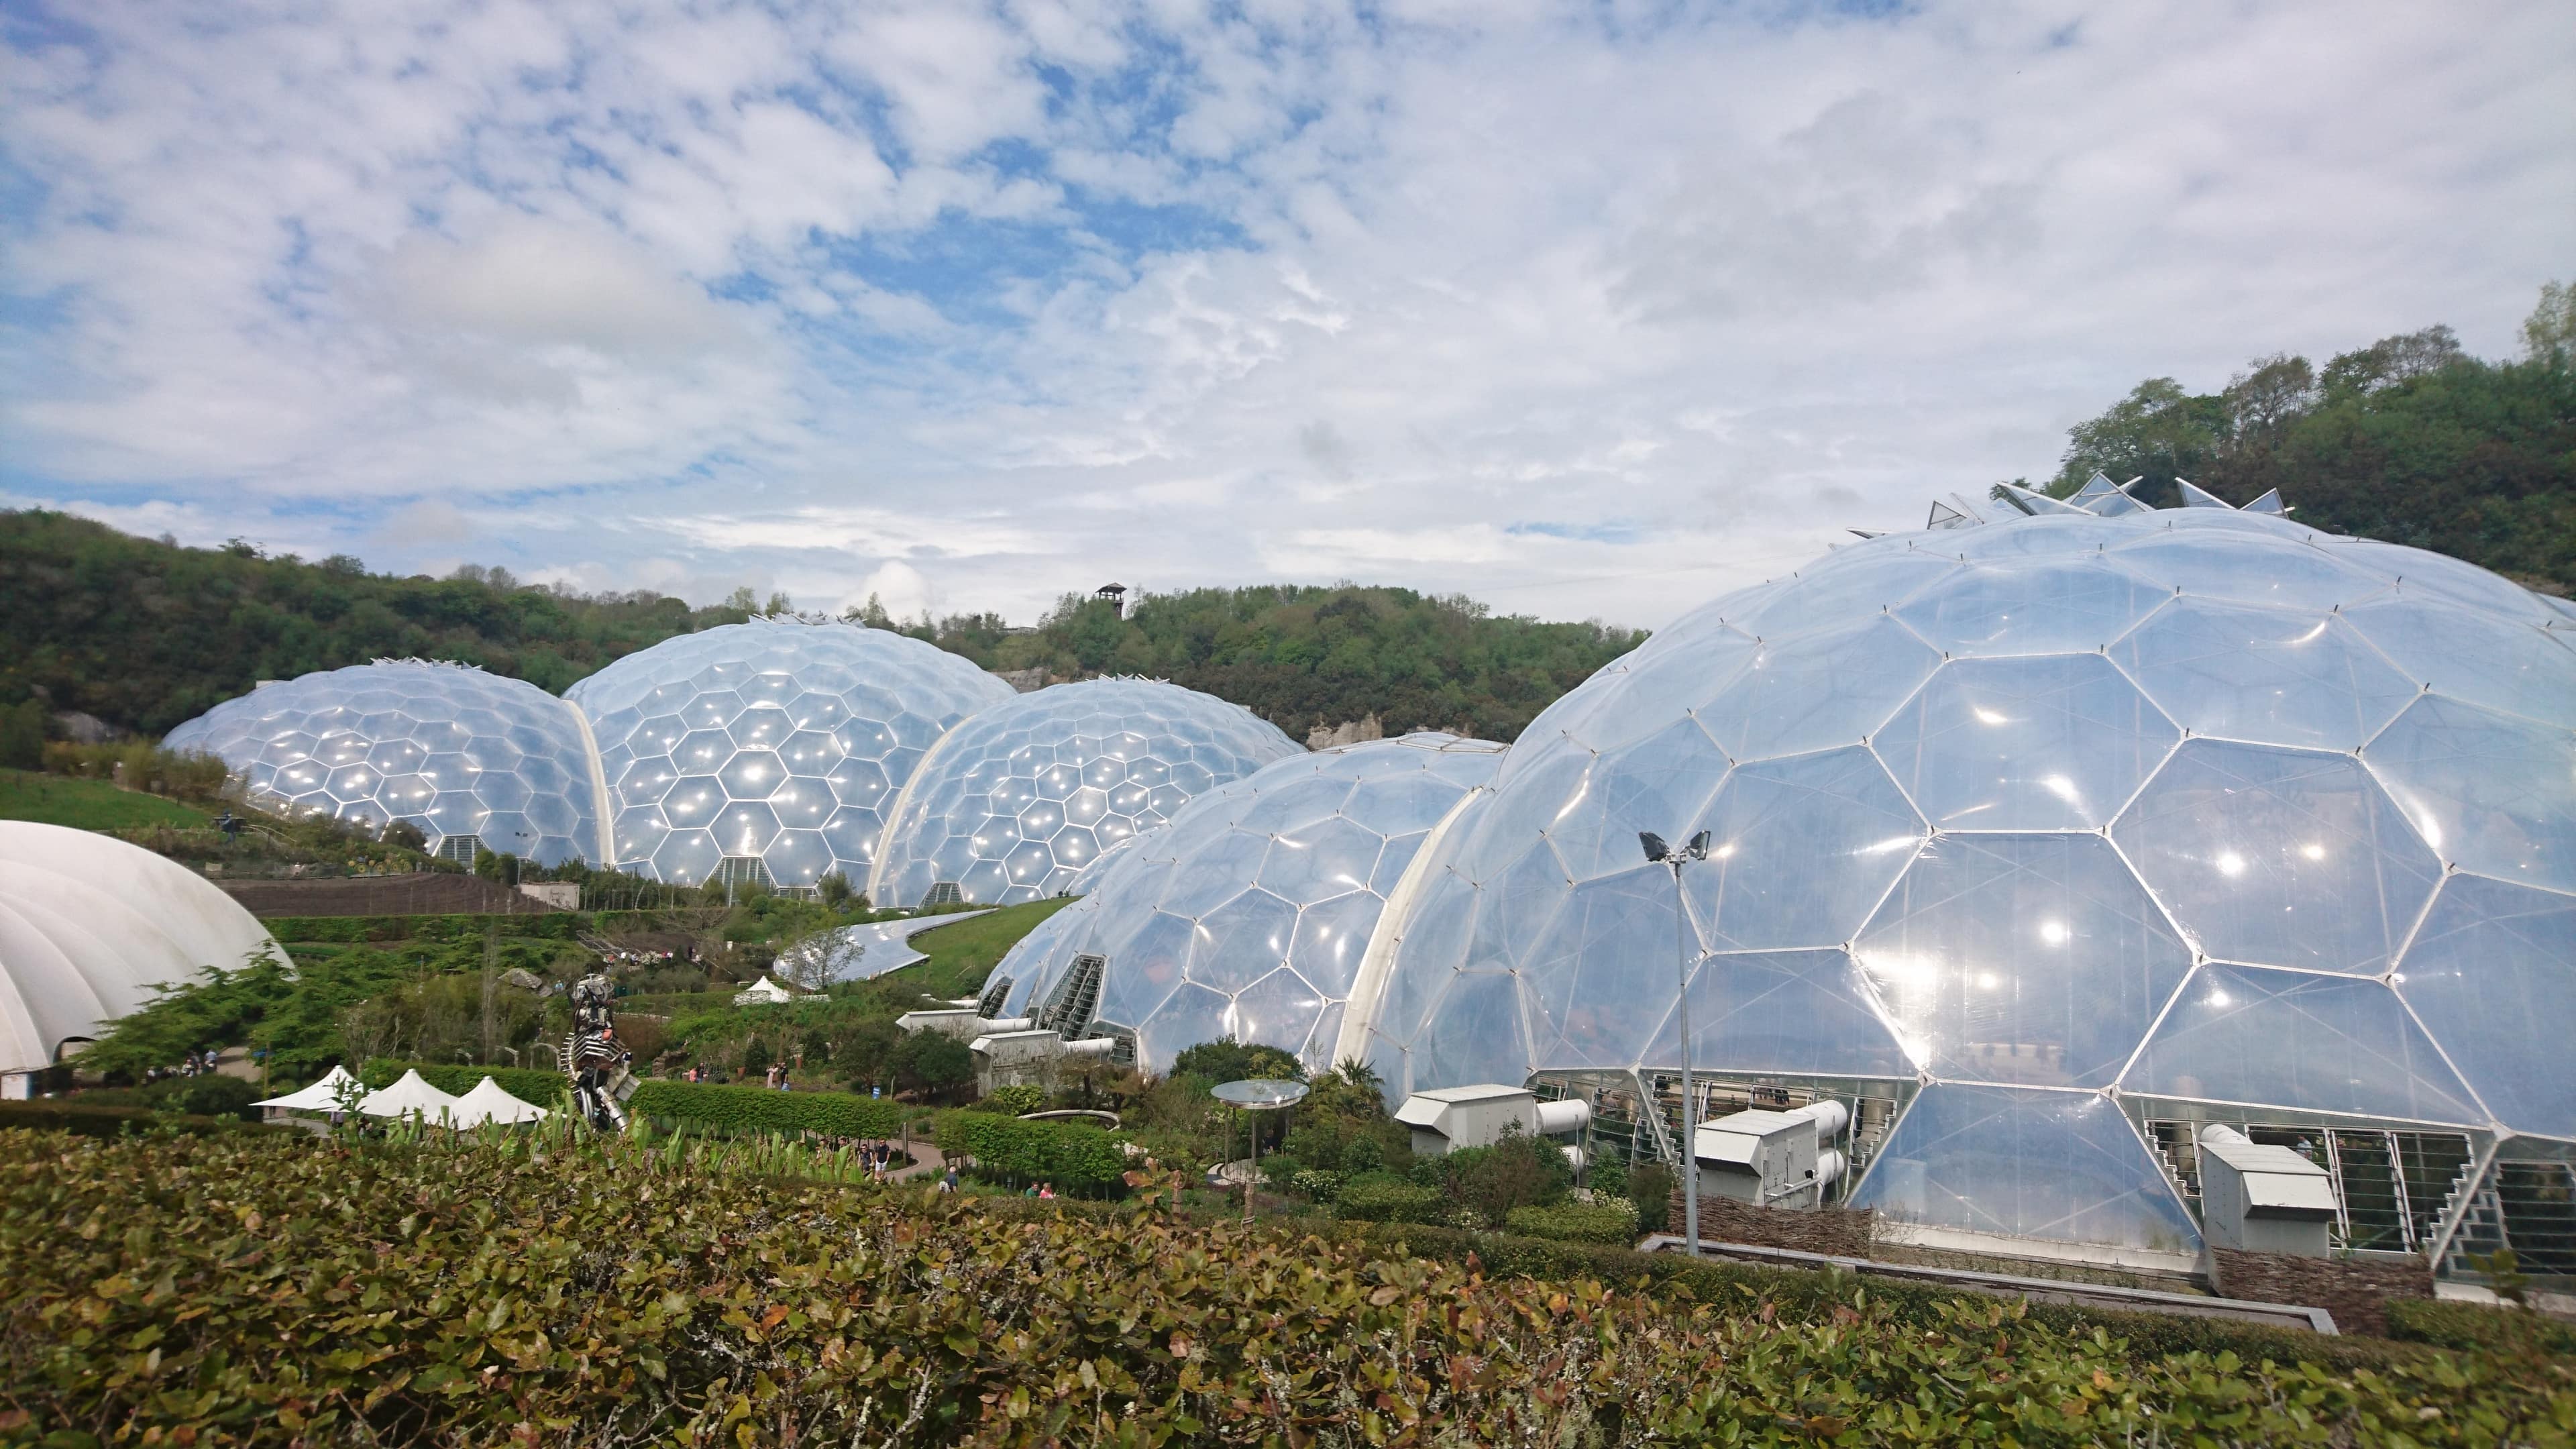 The Eden Project will keep everyone in the family busy for hours